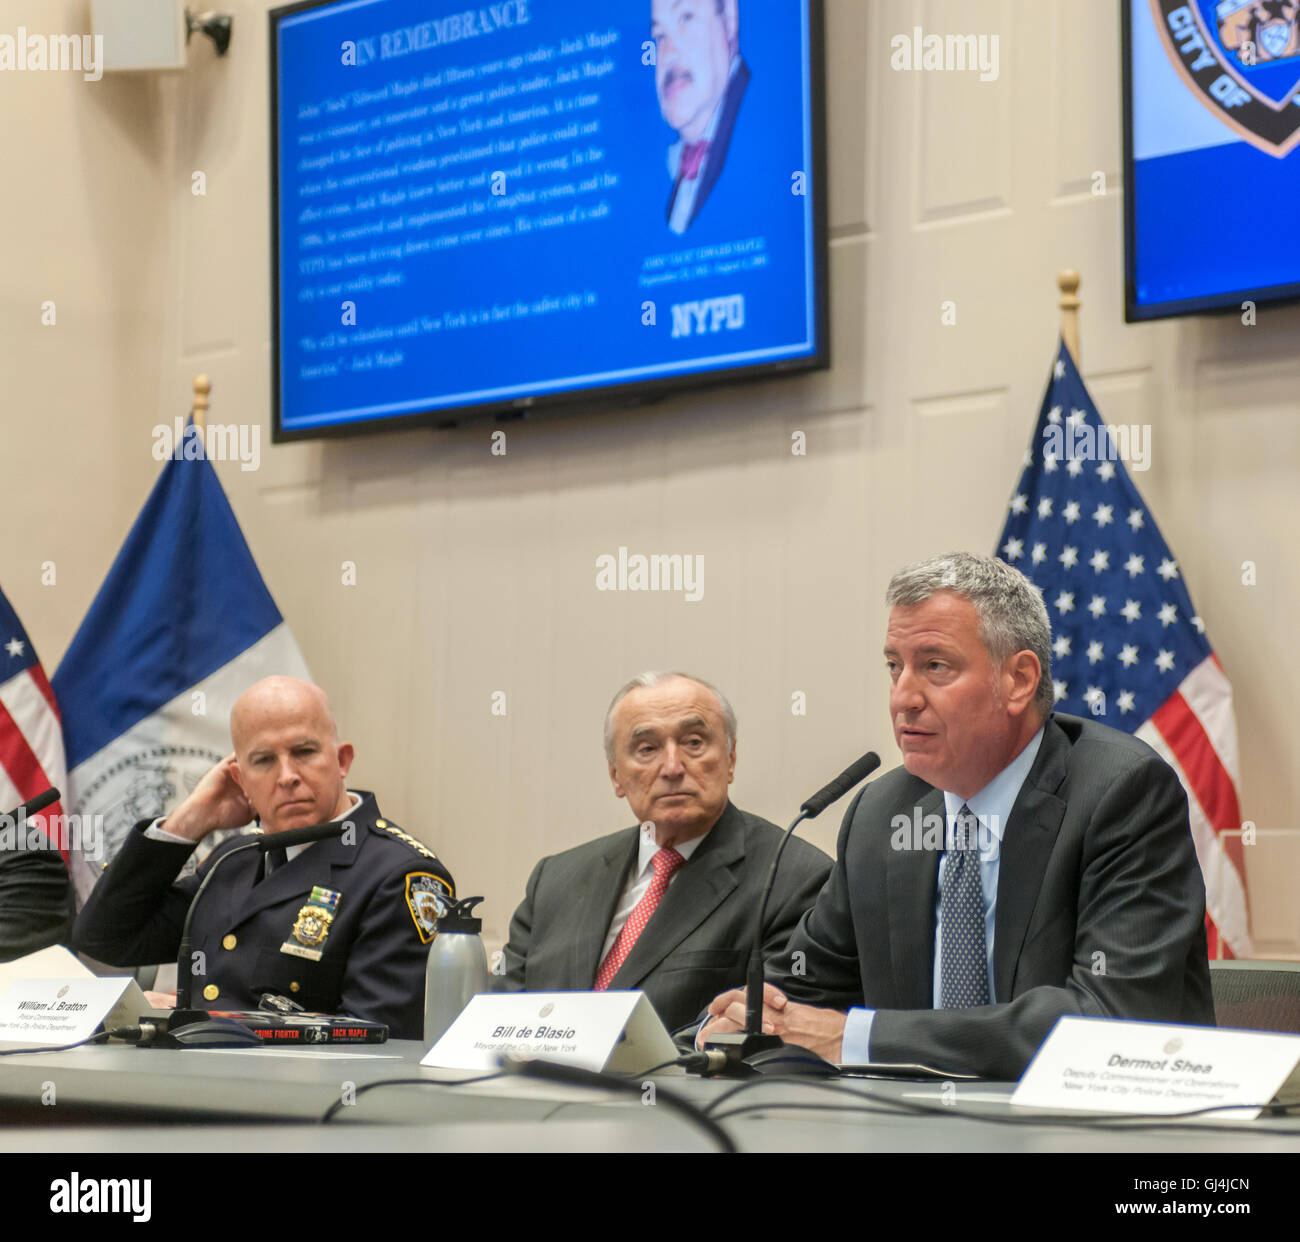 New York Mayor Bill de Blasio, right, and NYPD Commissioner William Bratton, center, and Chief of Department Jimmy O'Neill report to the press in the Jack Maples Compstat Room at One Police Plaza in New York on Thursday, August 4, 2016. The officials answered police related questions from the press as well as briefing the media on the ongoing decrease in violent crime in the city. O'Neill is to take over as commissioner in September when Bratton leaves. (© Richard B. Levine) Stock Photo